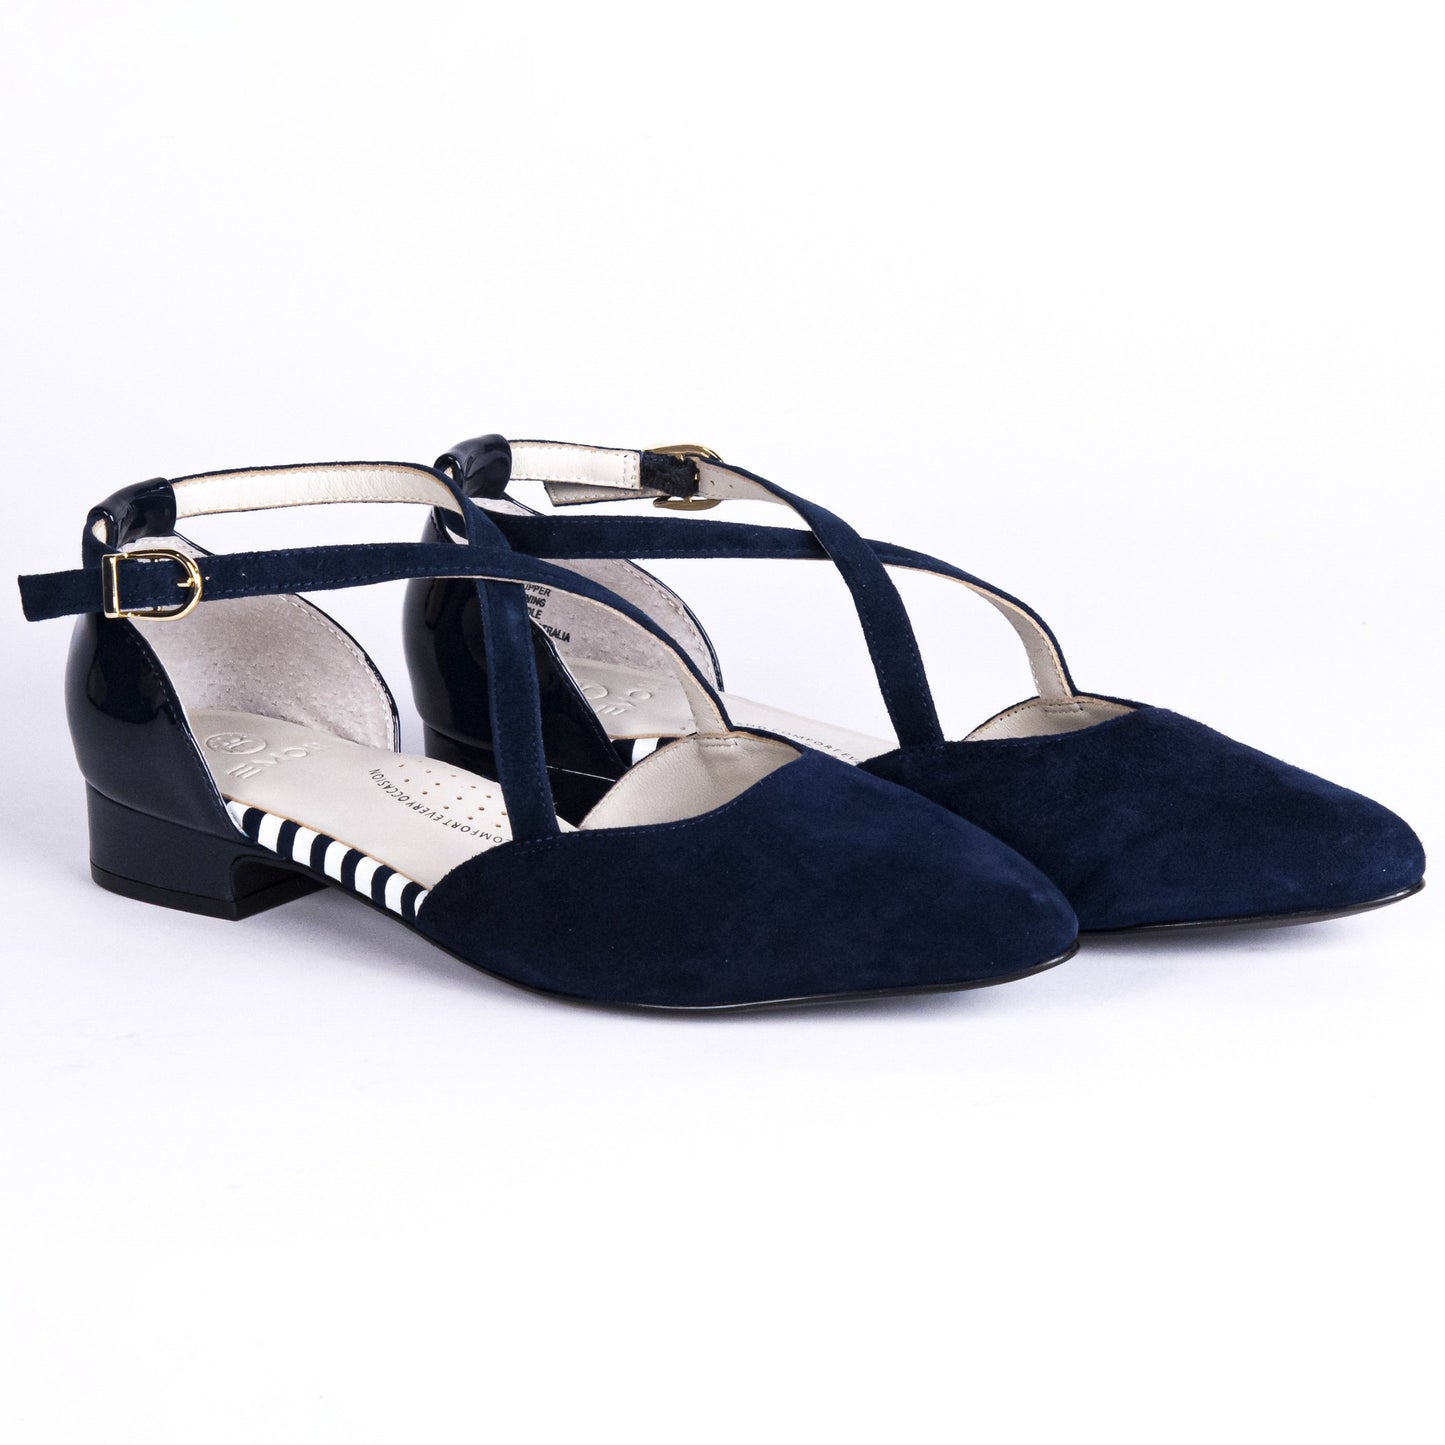 Navy Color flat shoe, arch support, wide toe, comfortable work shoe, shoes for office 